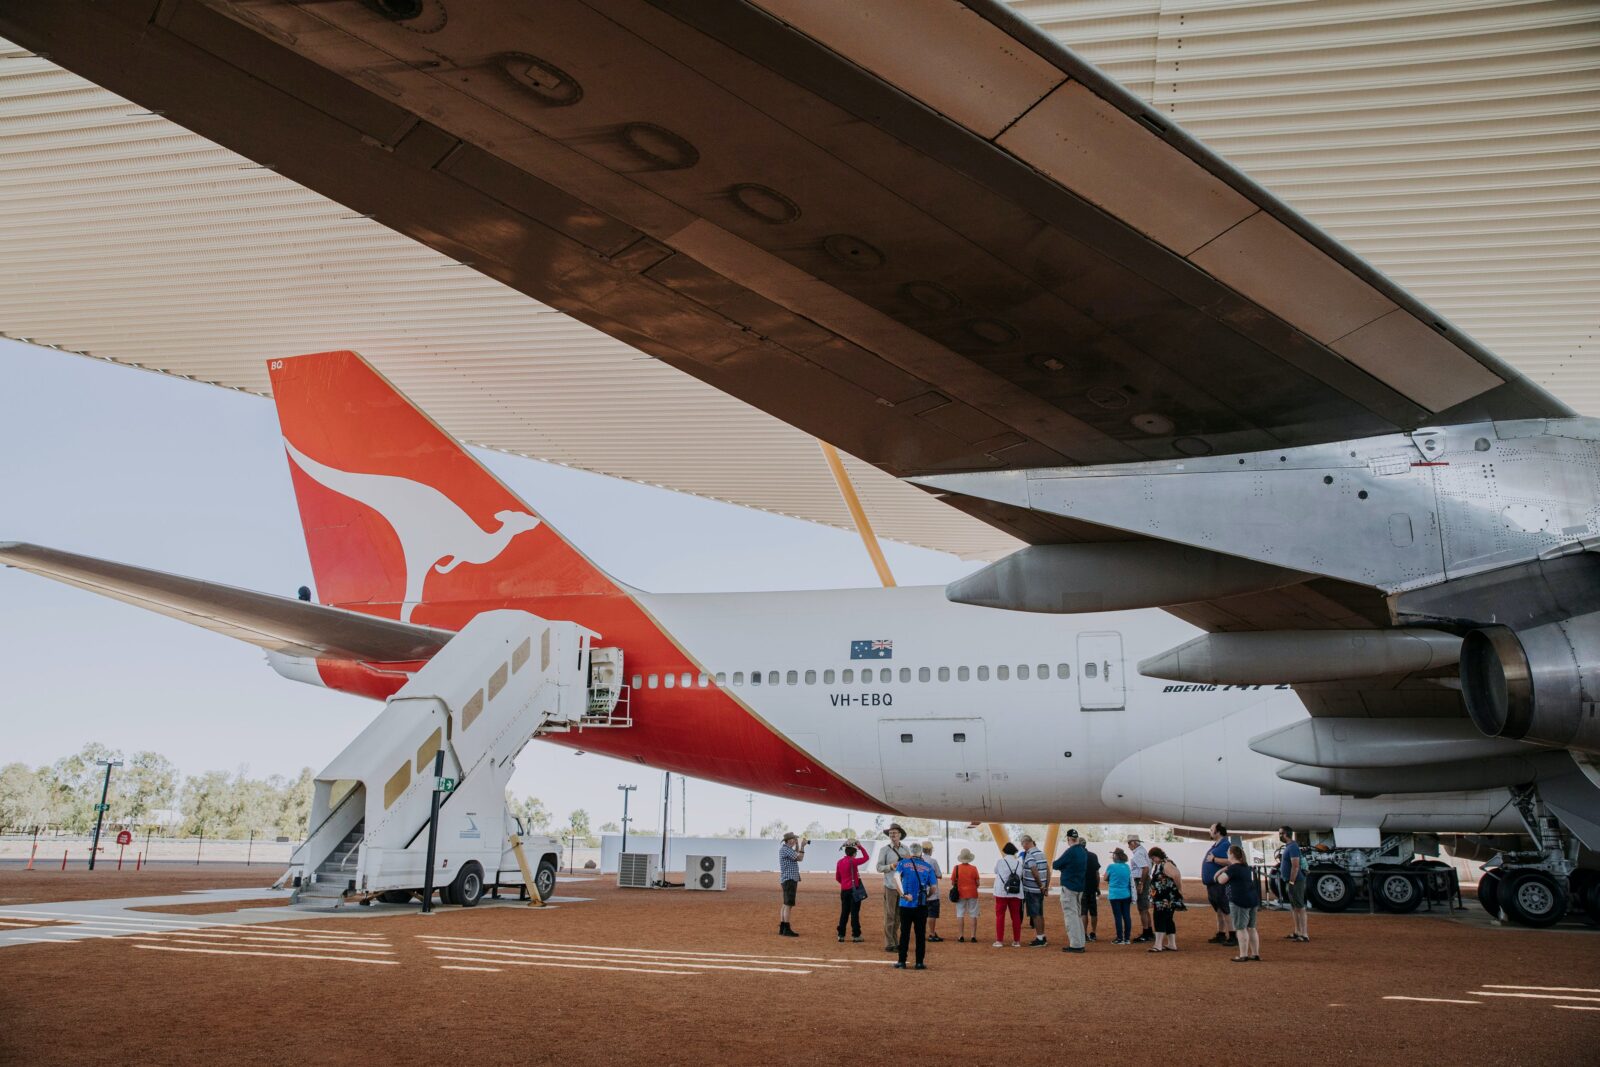 Image captured by Tourism & Events Queensland of an airpark tour taking place under the 747 wing.